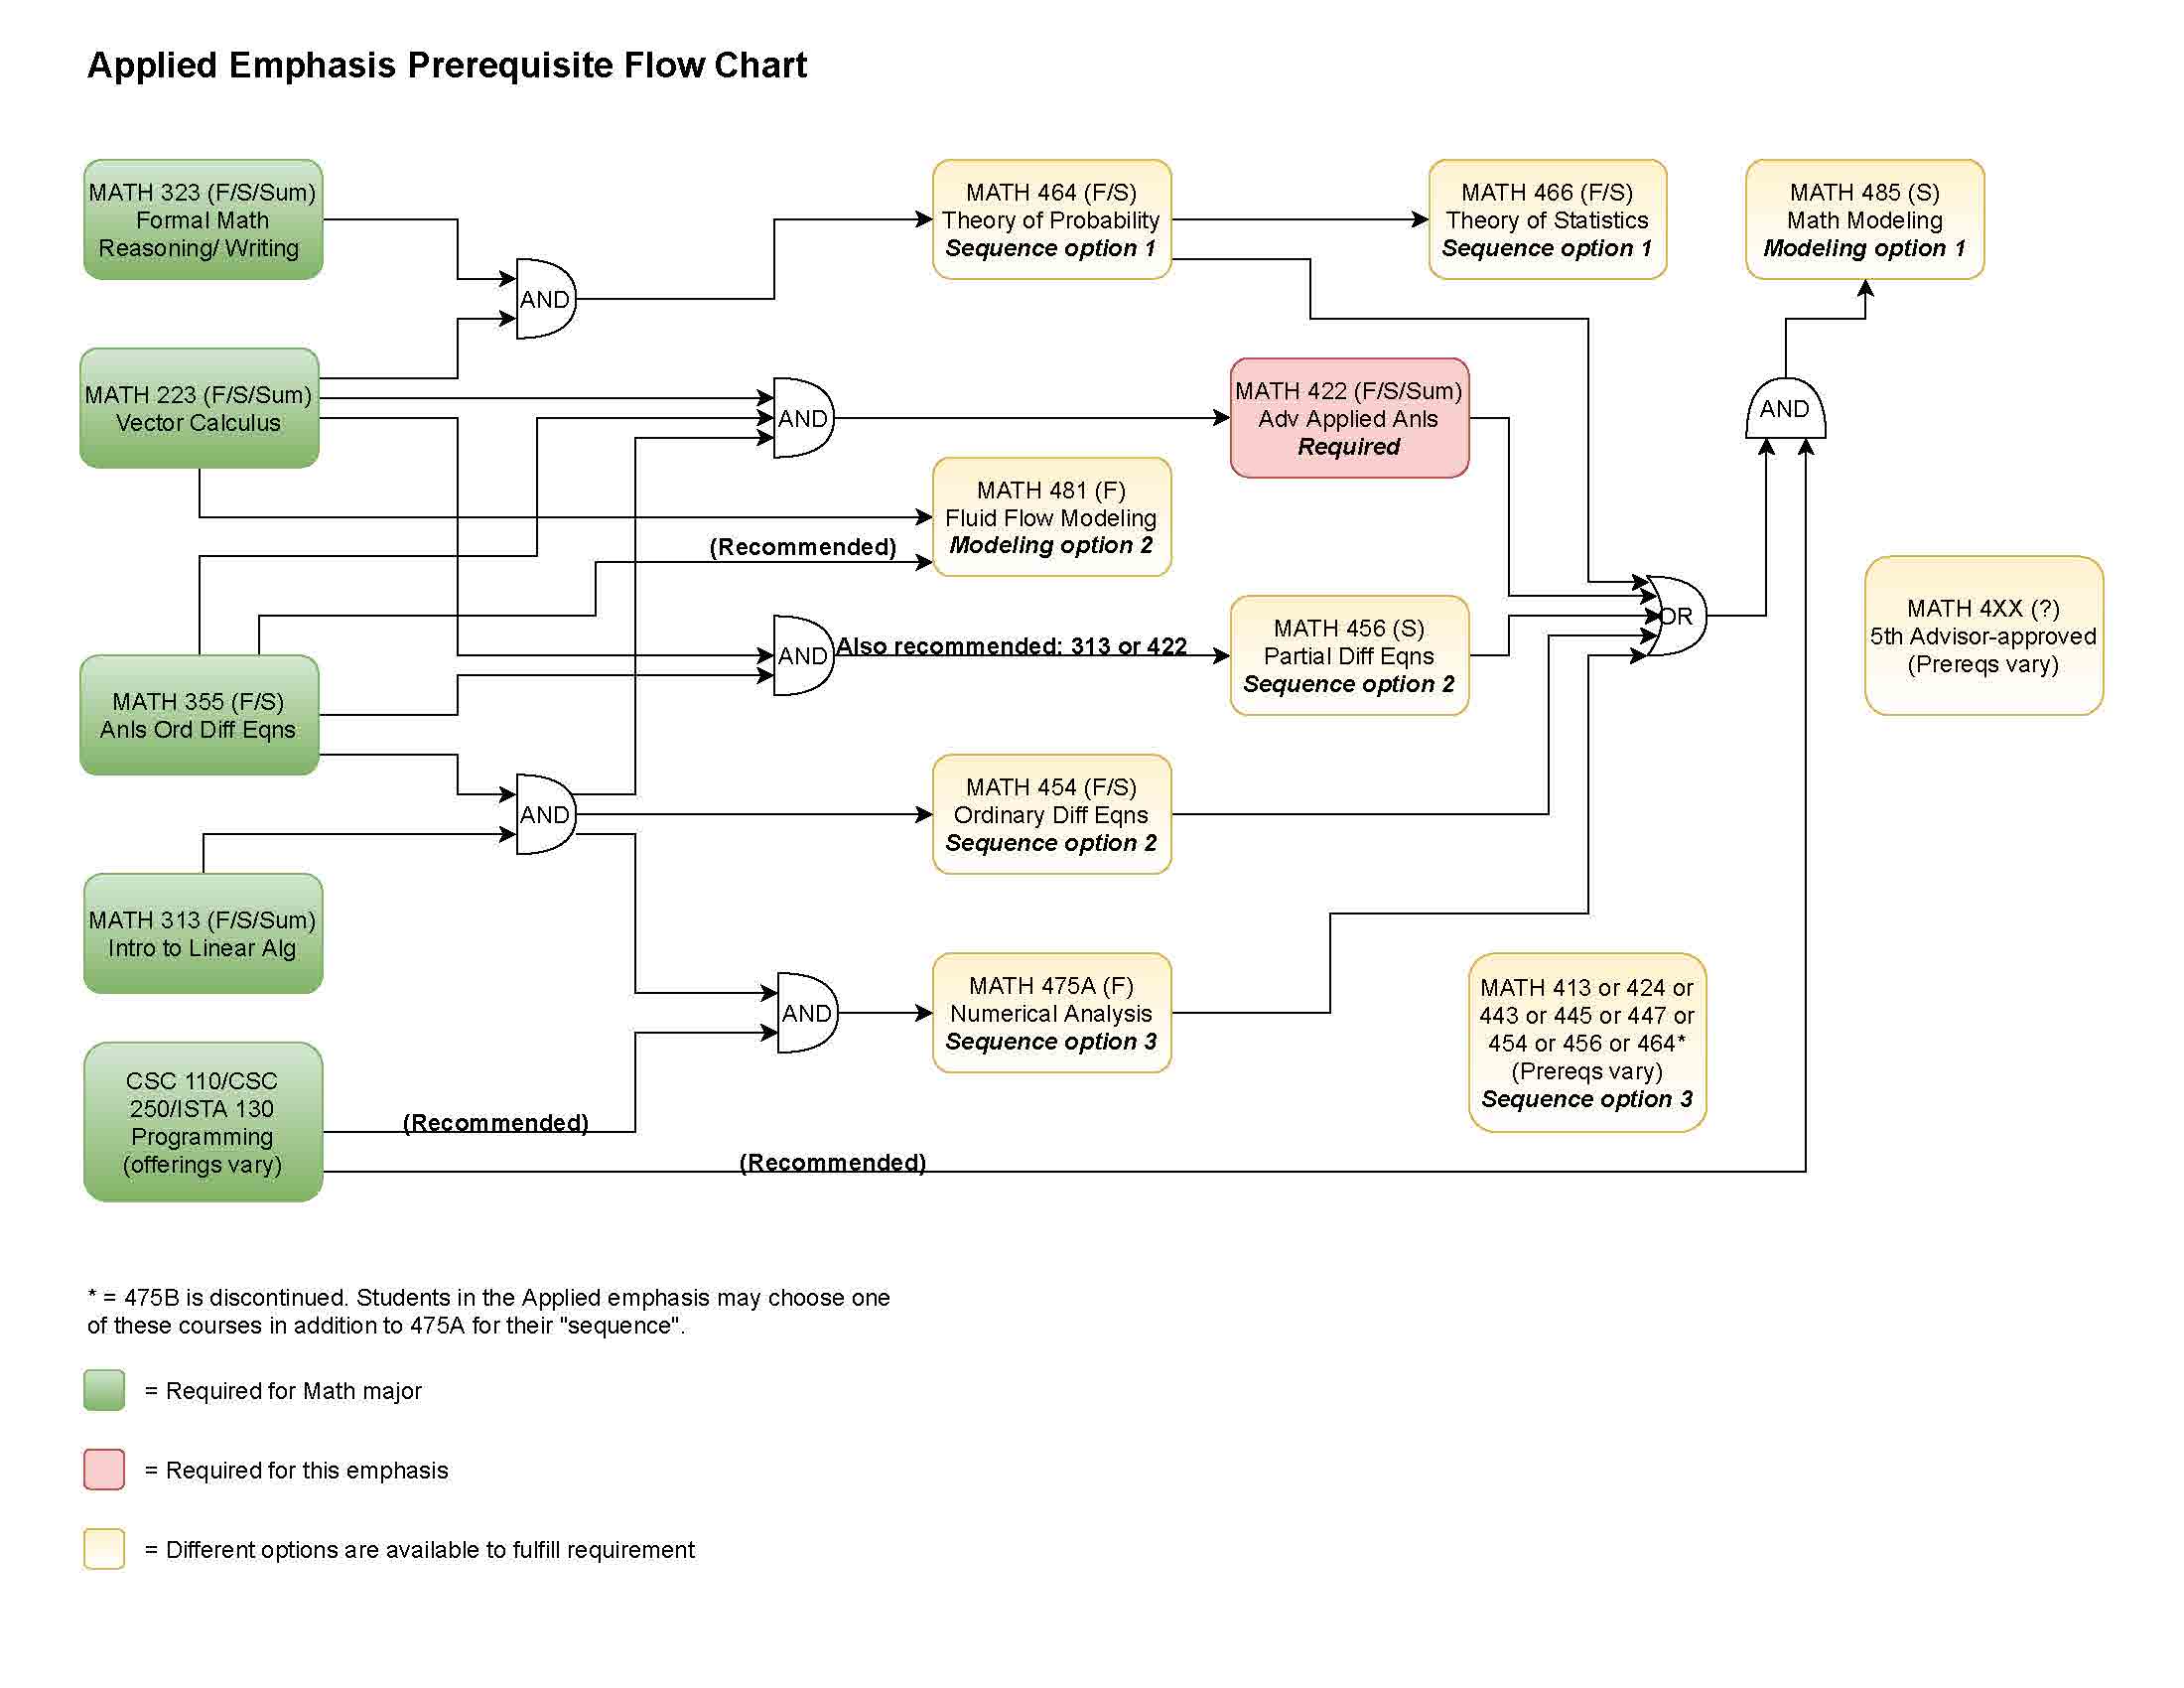 prerequisite flowchart for applied emphasis (click image for downloadable PDF)